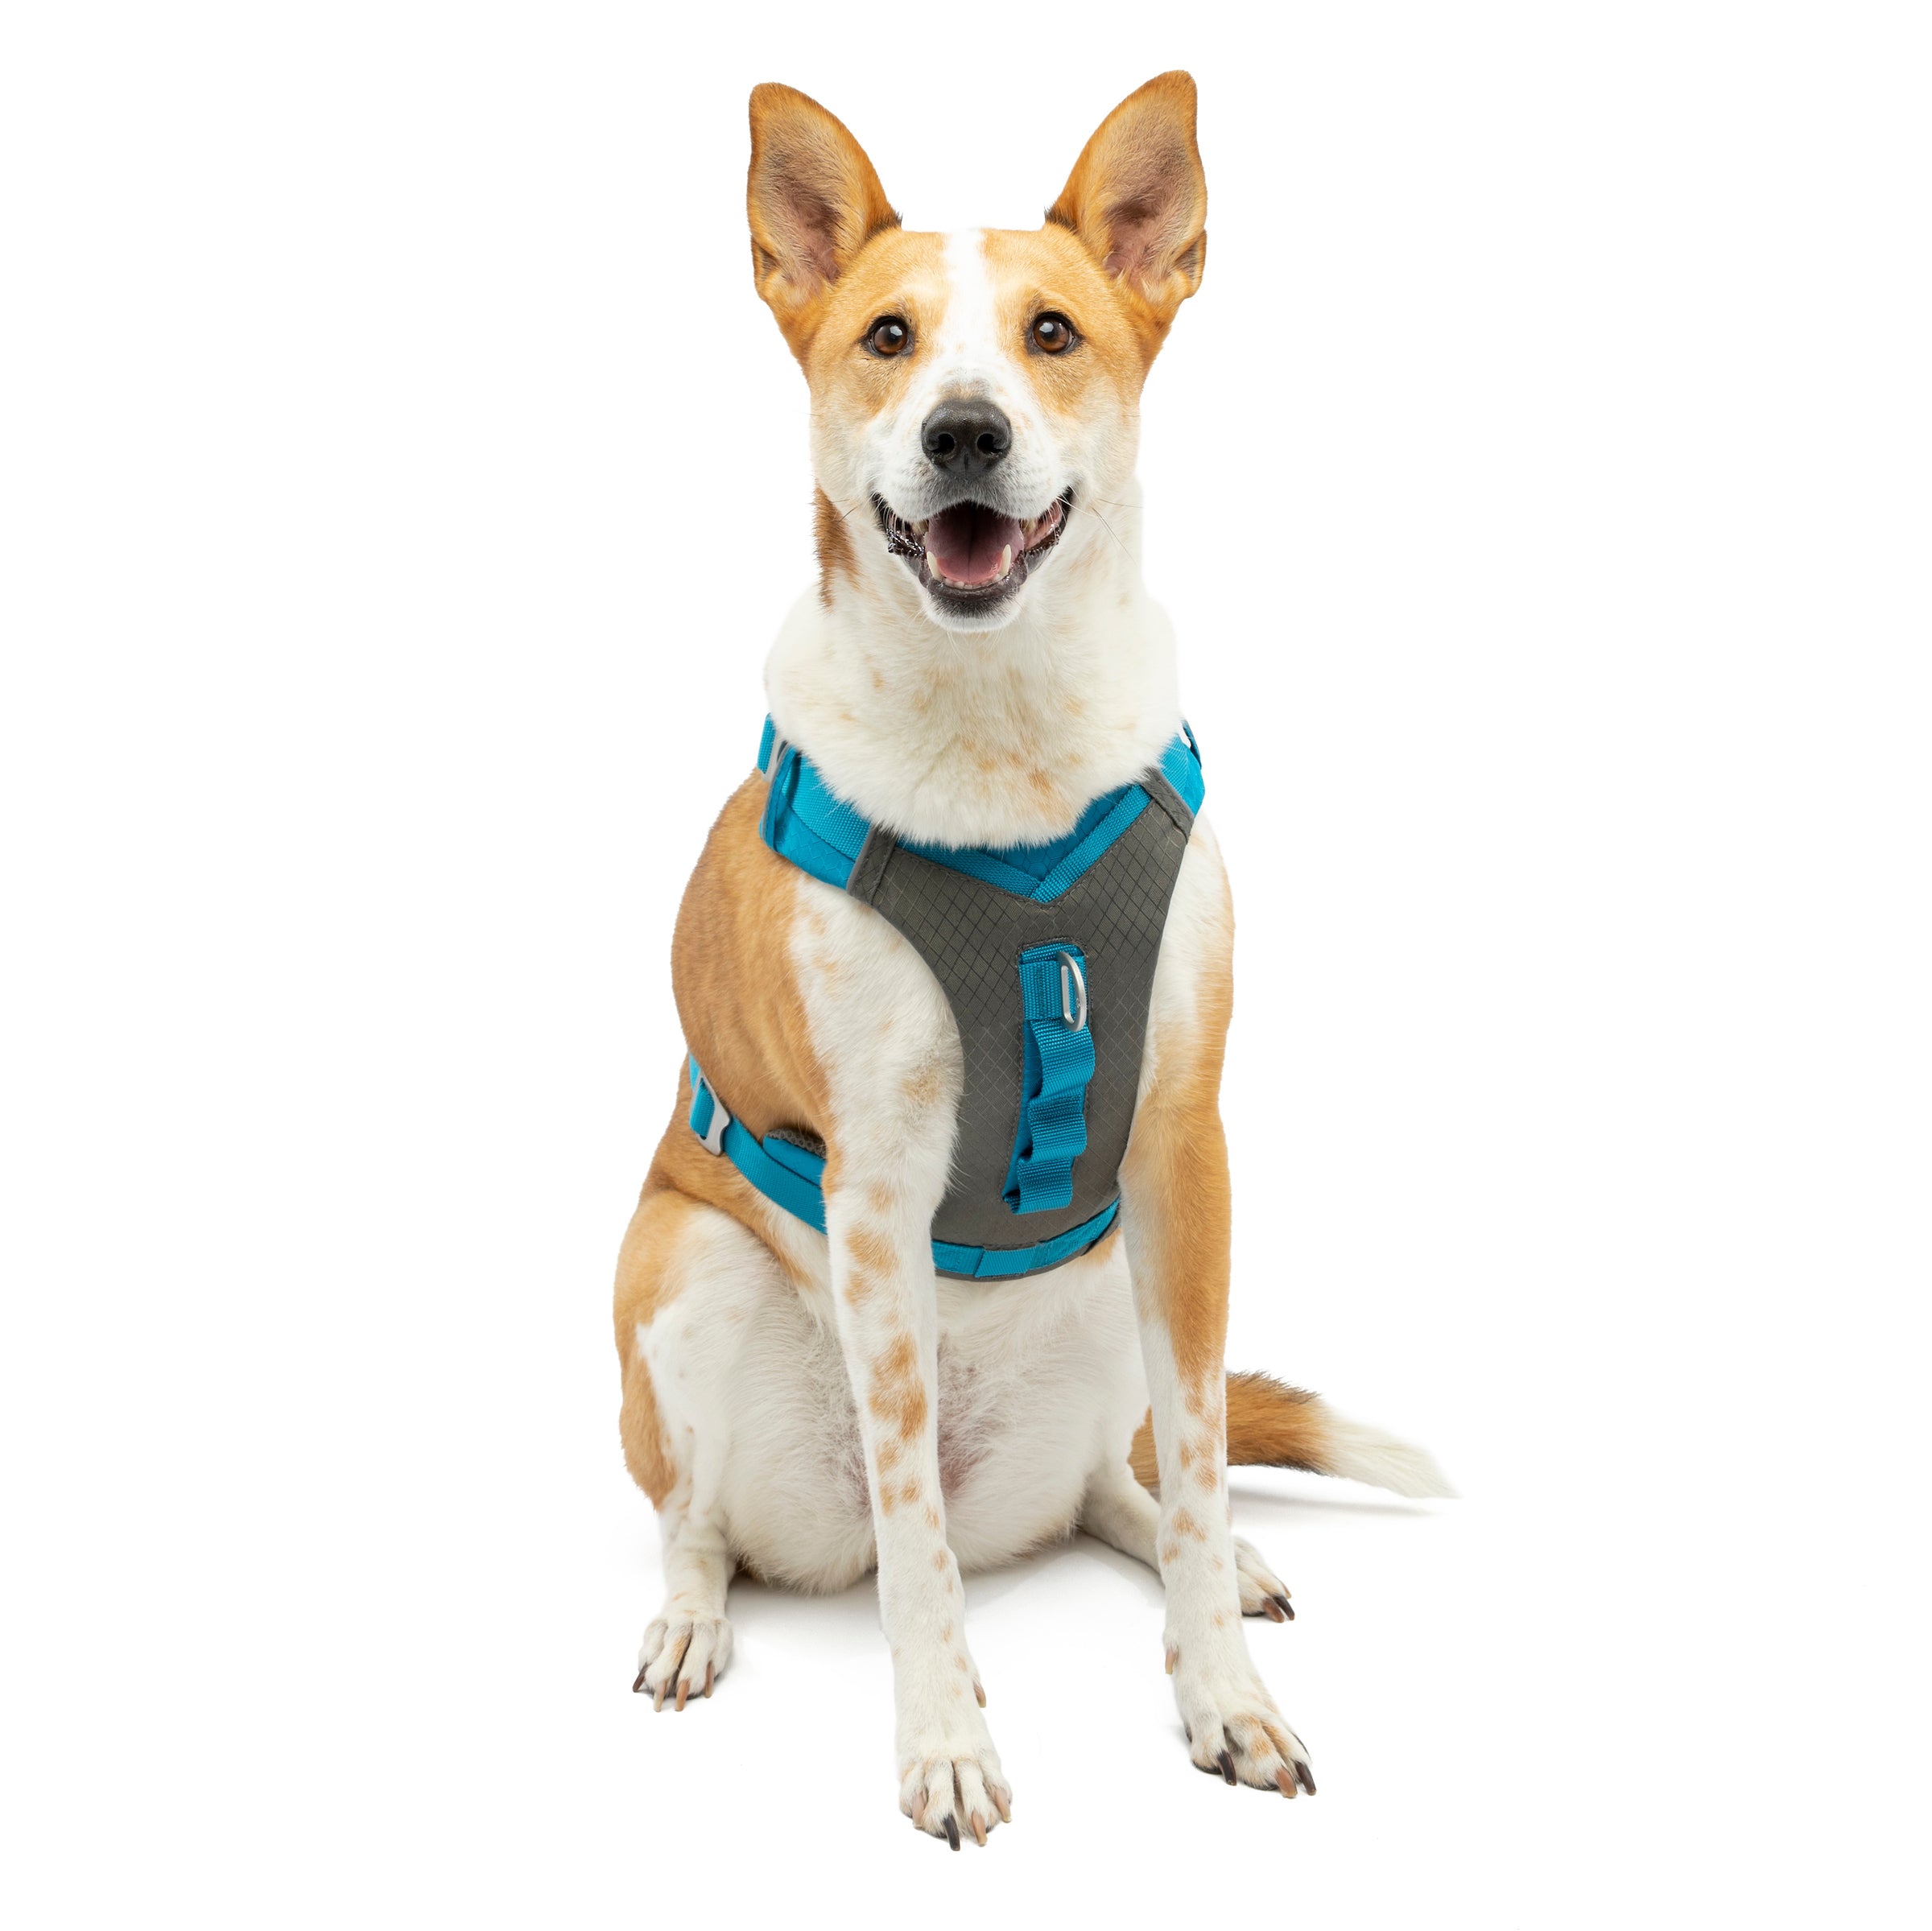 Dog Clothes, Dog Accessories, Dog Harnesses